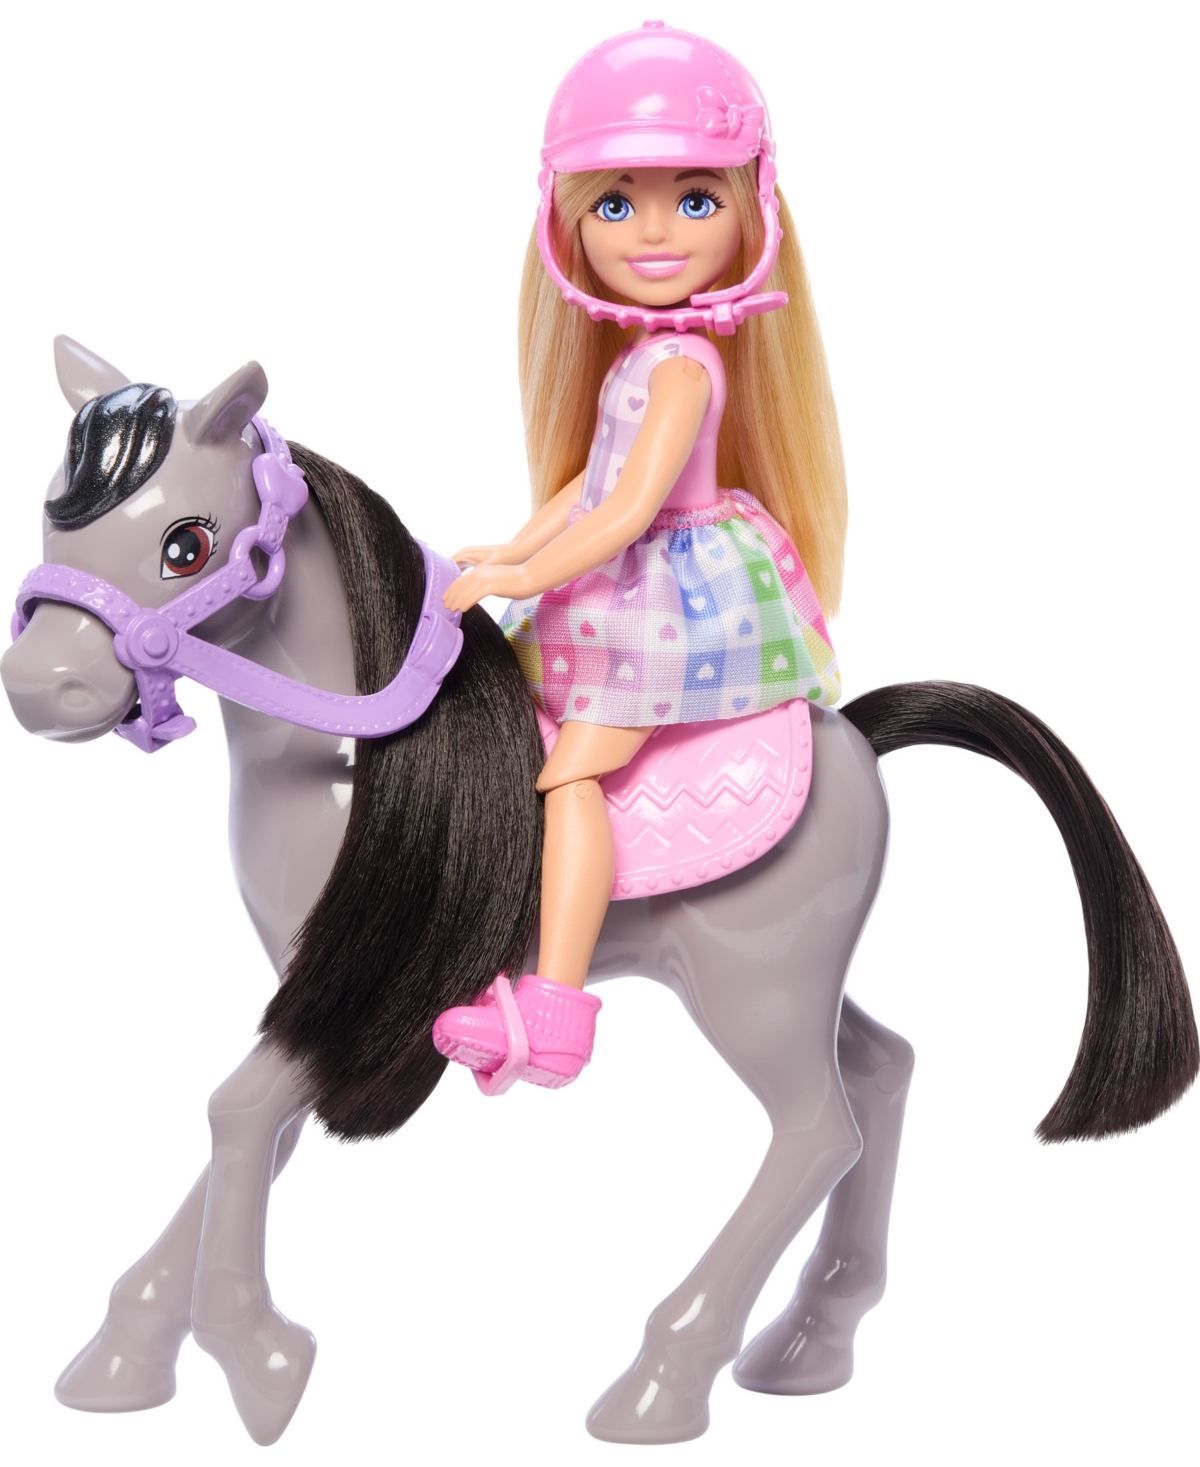 Barbie Kids' Chelsea Doll And Horse Toy Set, Includes Helmet Accessory, Doll Bends At Knees To "ride" Pony In Multi